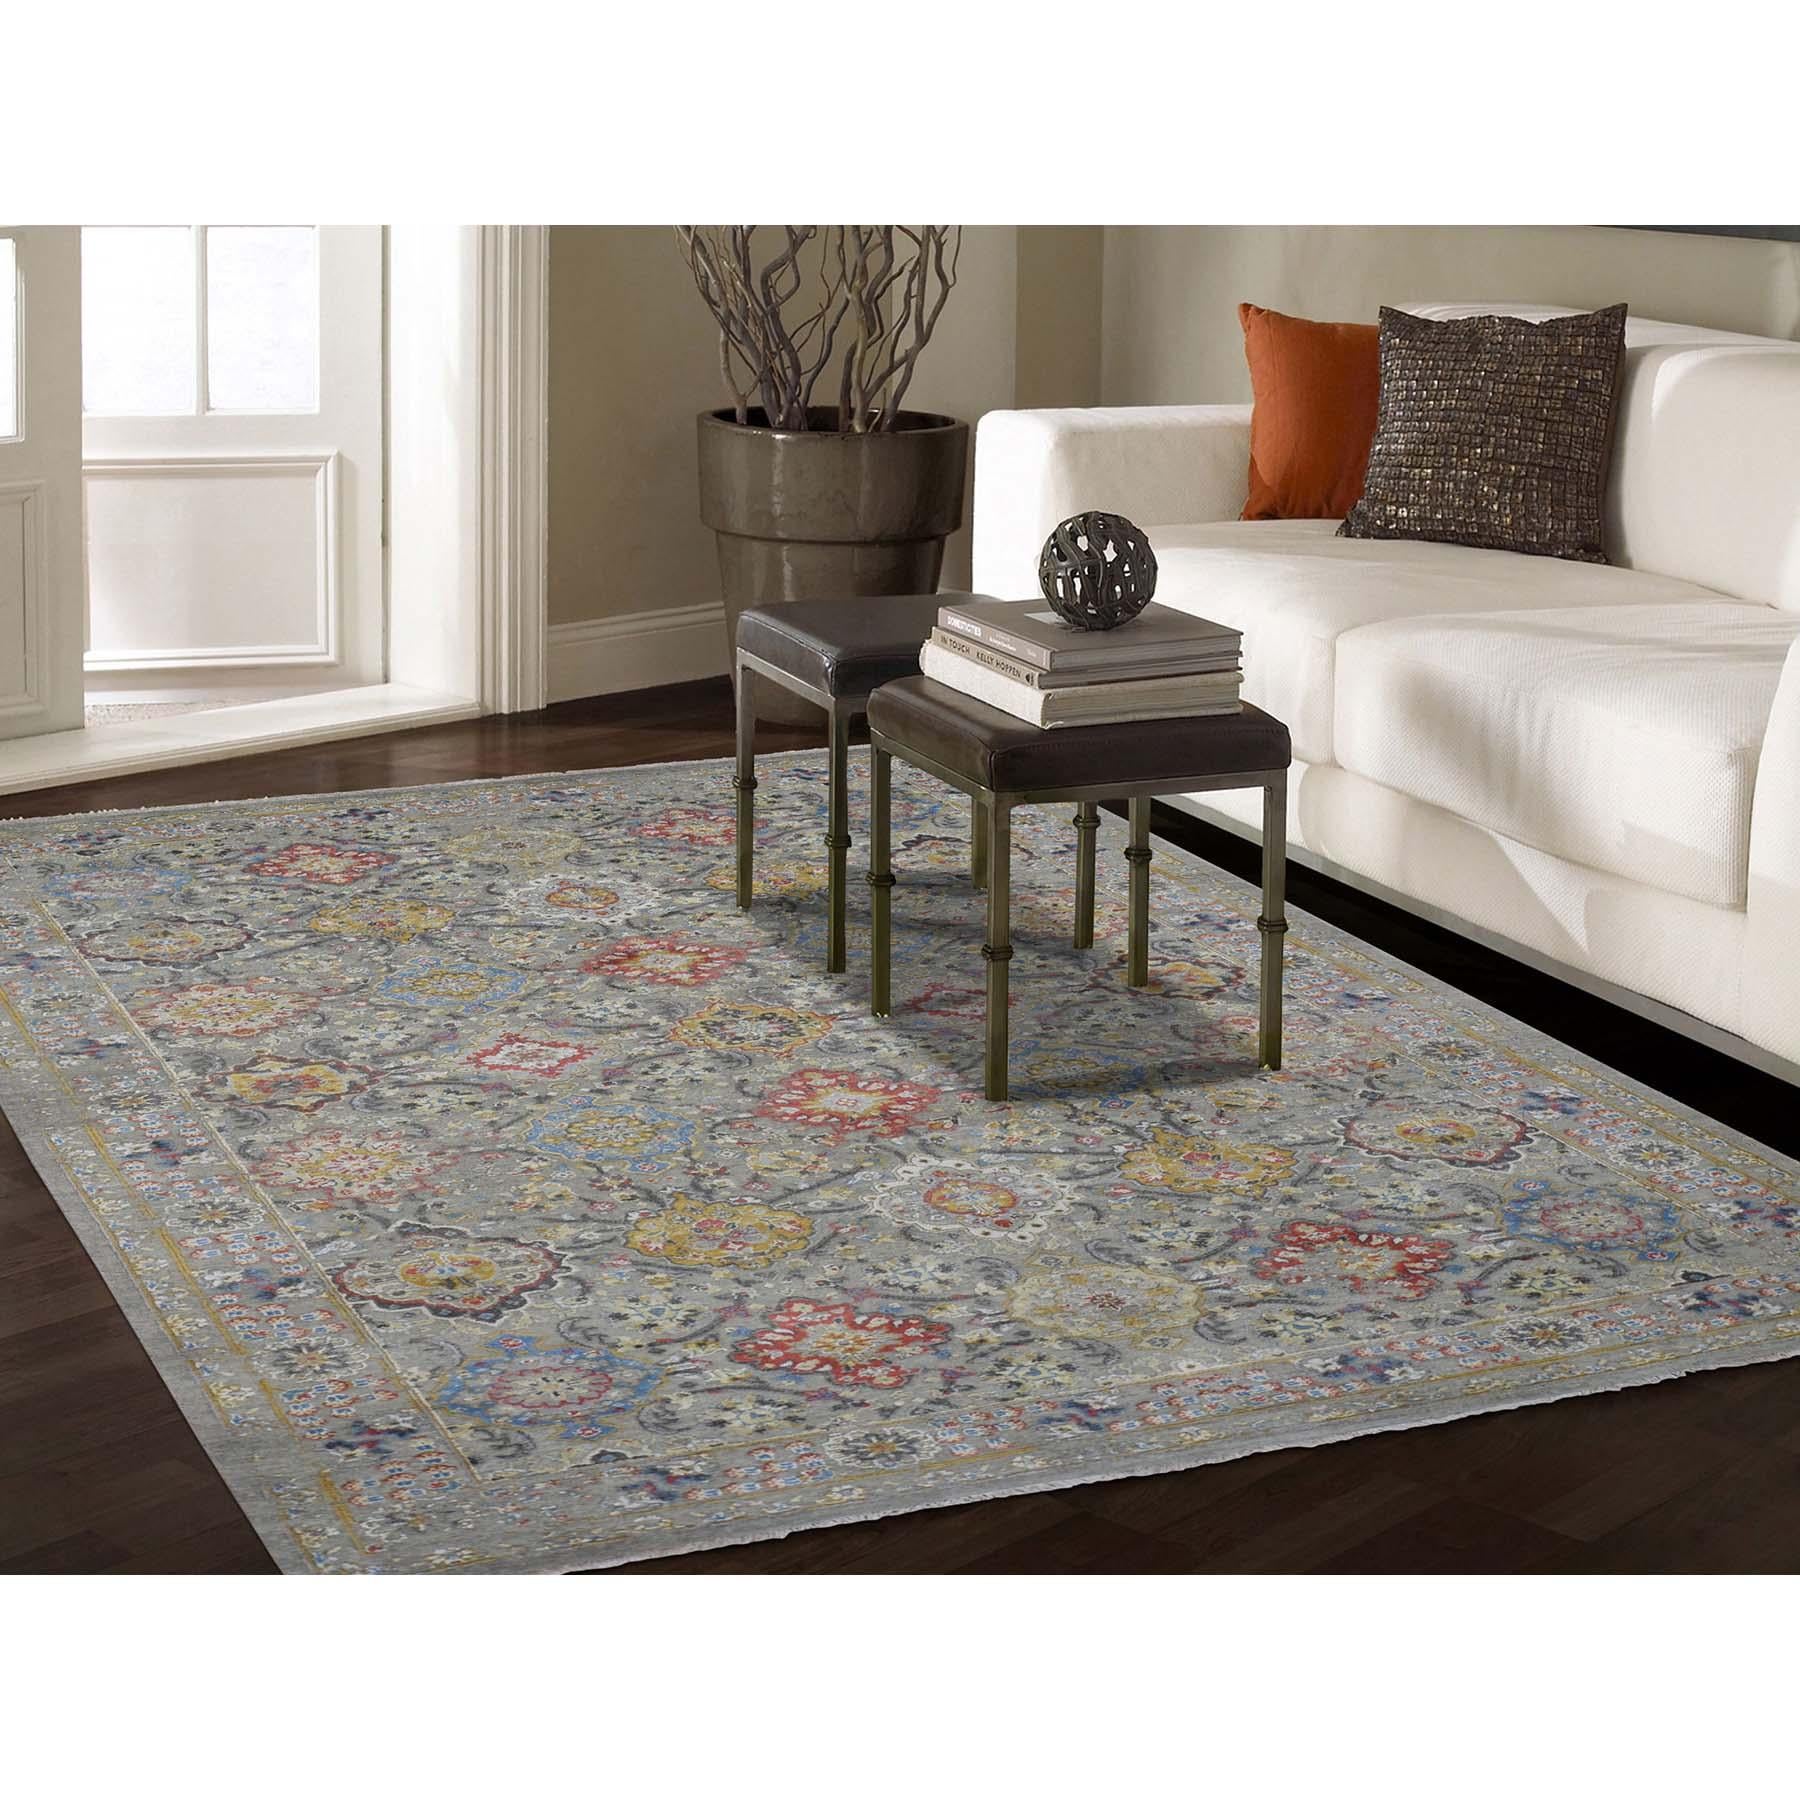 This is a truly genuine one-of-a-kind The Sunset Rosettes pure silk and wool hand knotted Oriental rug. It has been knotted for months and months in the centuries-old Persian weaving craftsmanship techniques by expert artisans. Measures: 6'1